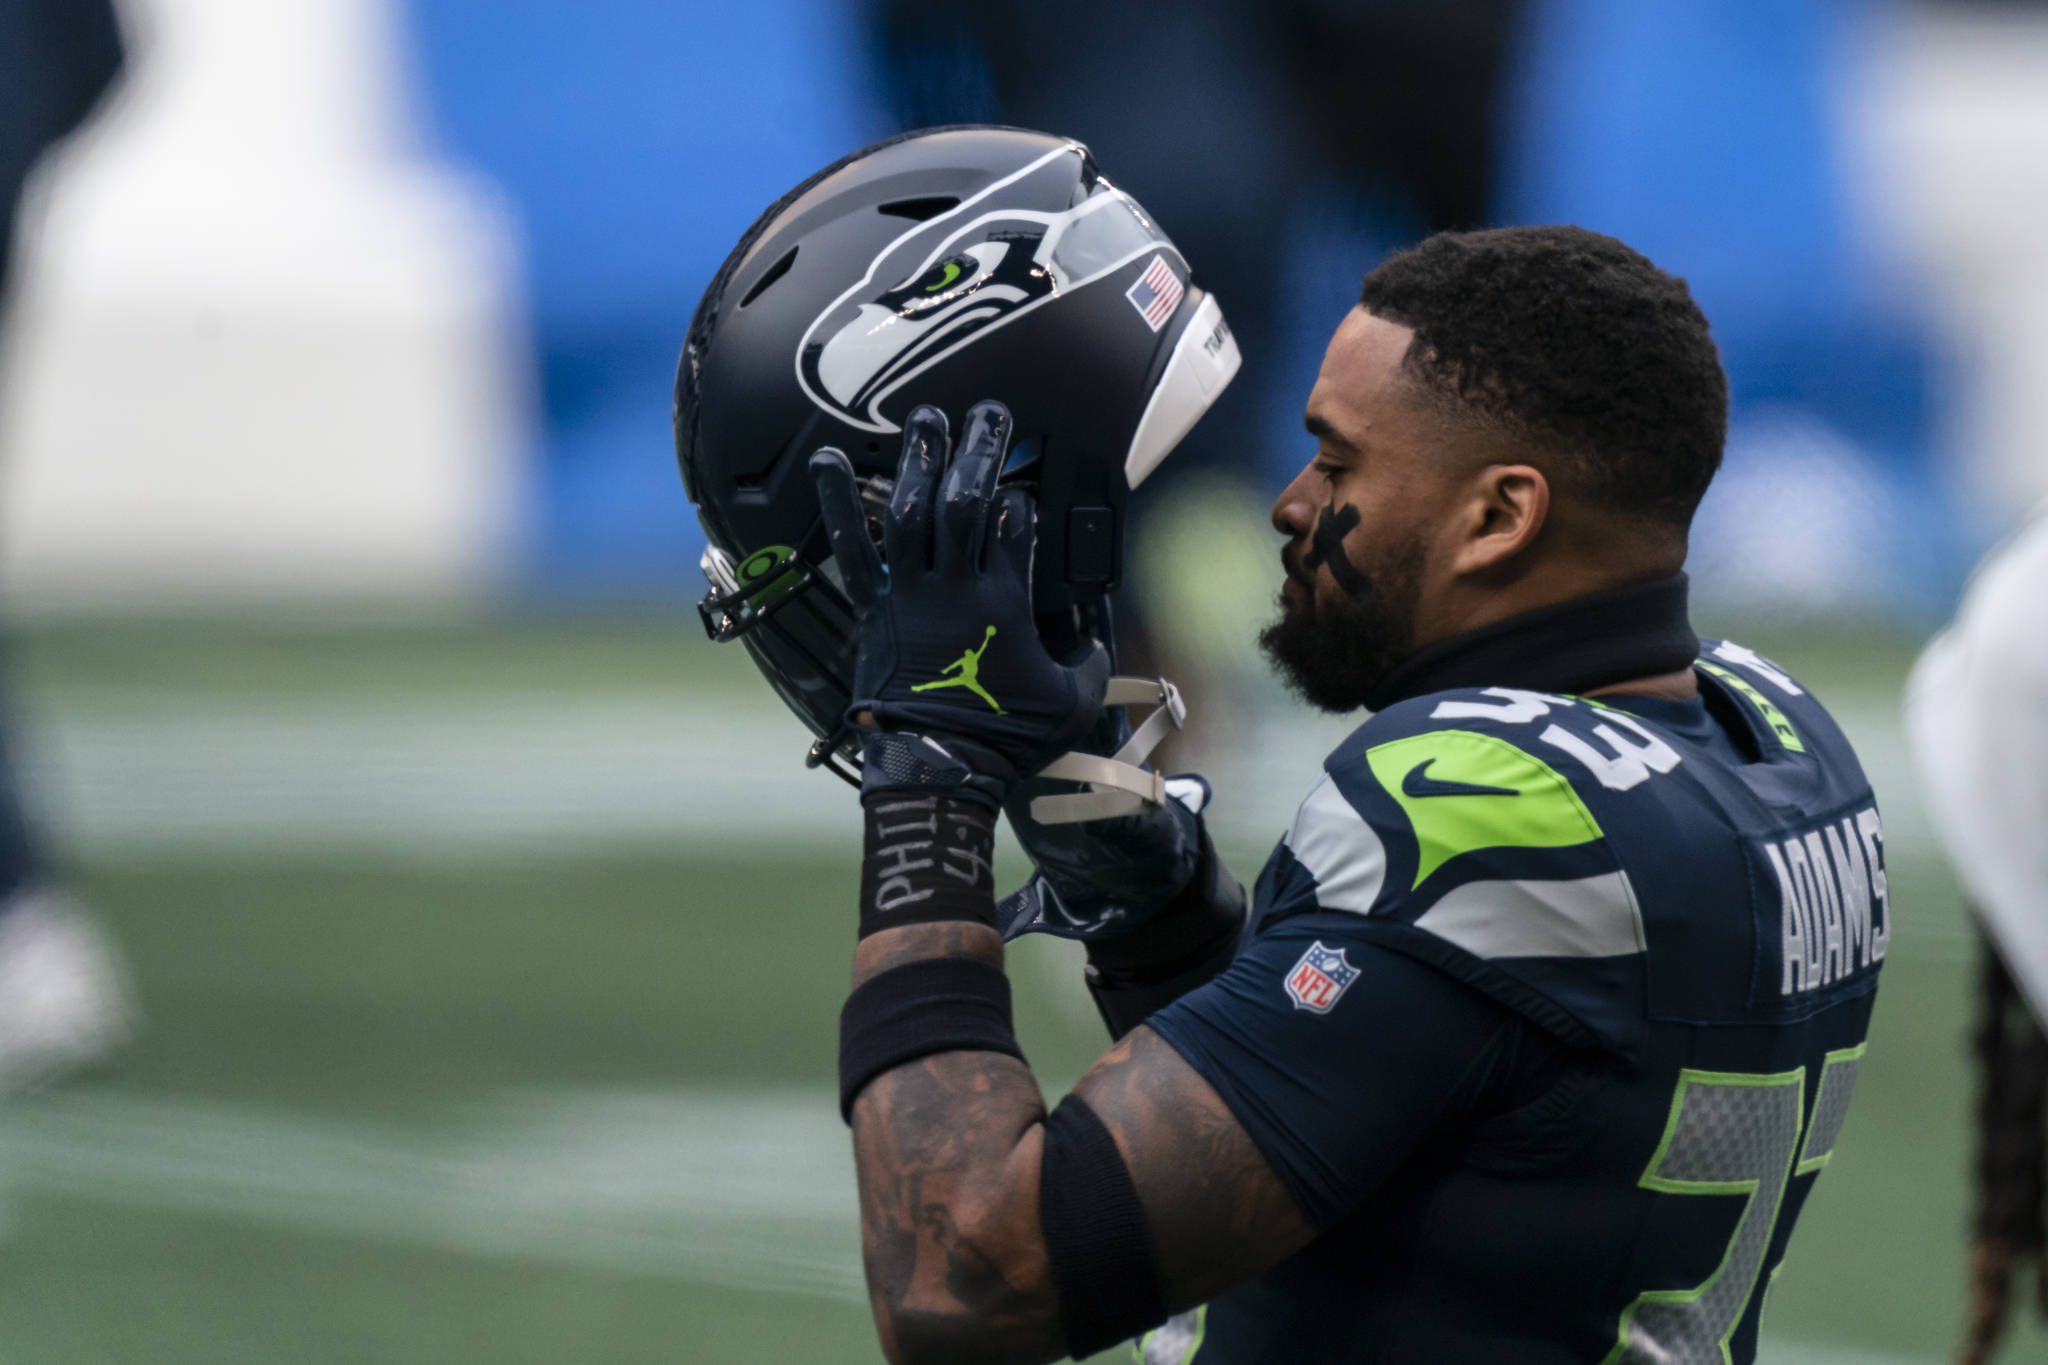 Seattle Seahawks safety Jamal Adams leaves first game in more than